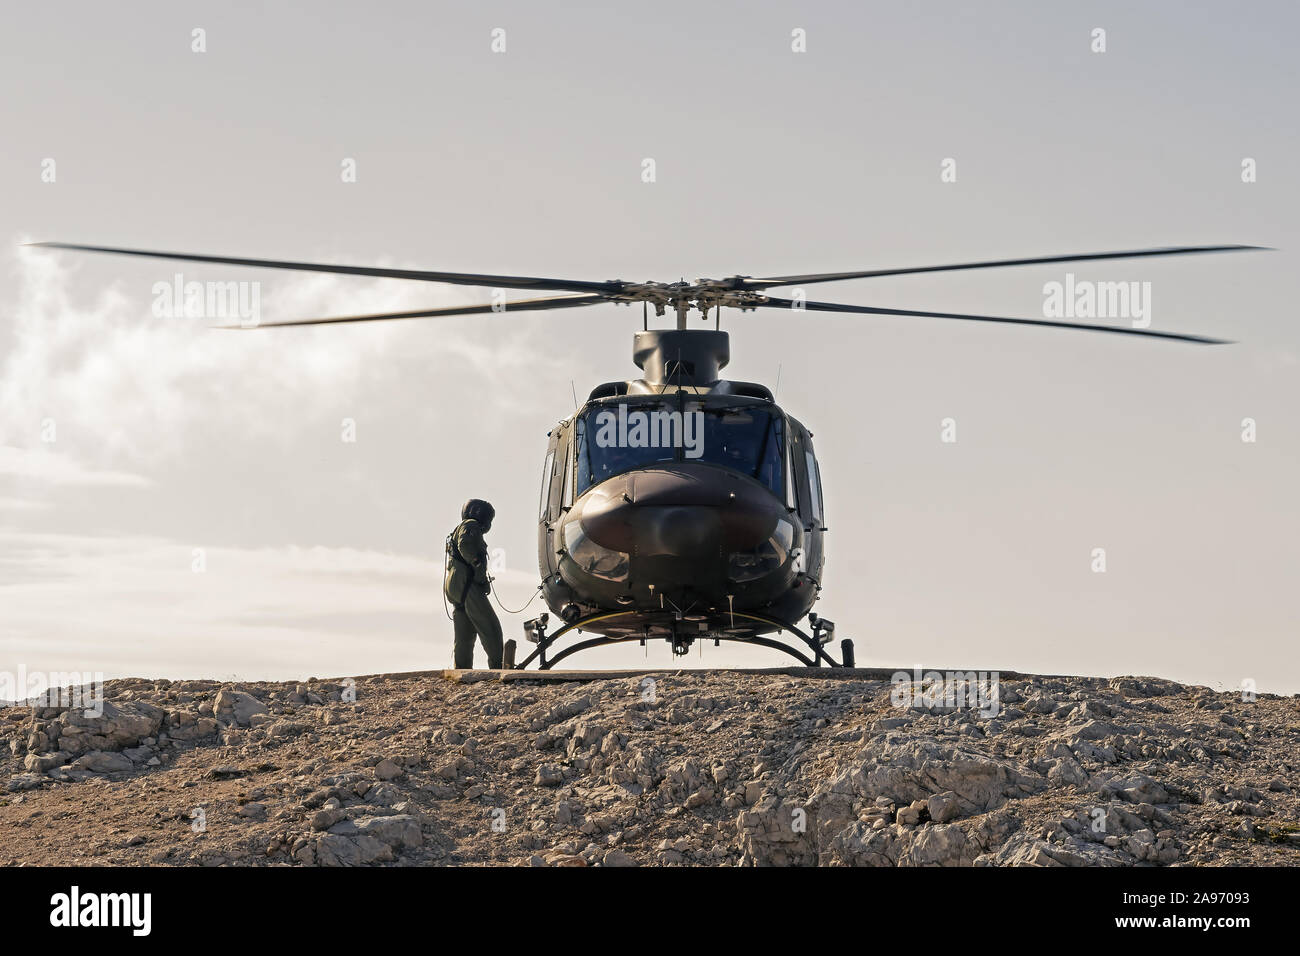 Pilot checking military helicopter before taking off from helipad on top of mountain. Military, airforce, defense and mountain rescue concepts. Stock Photo